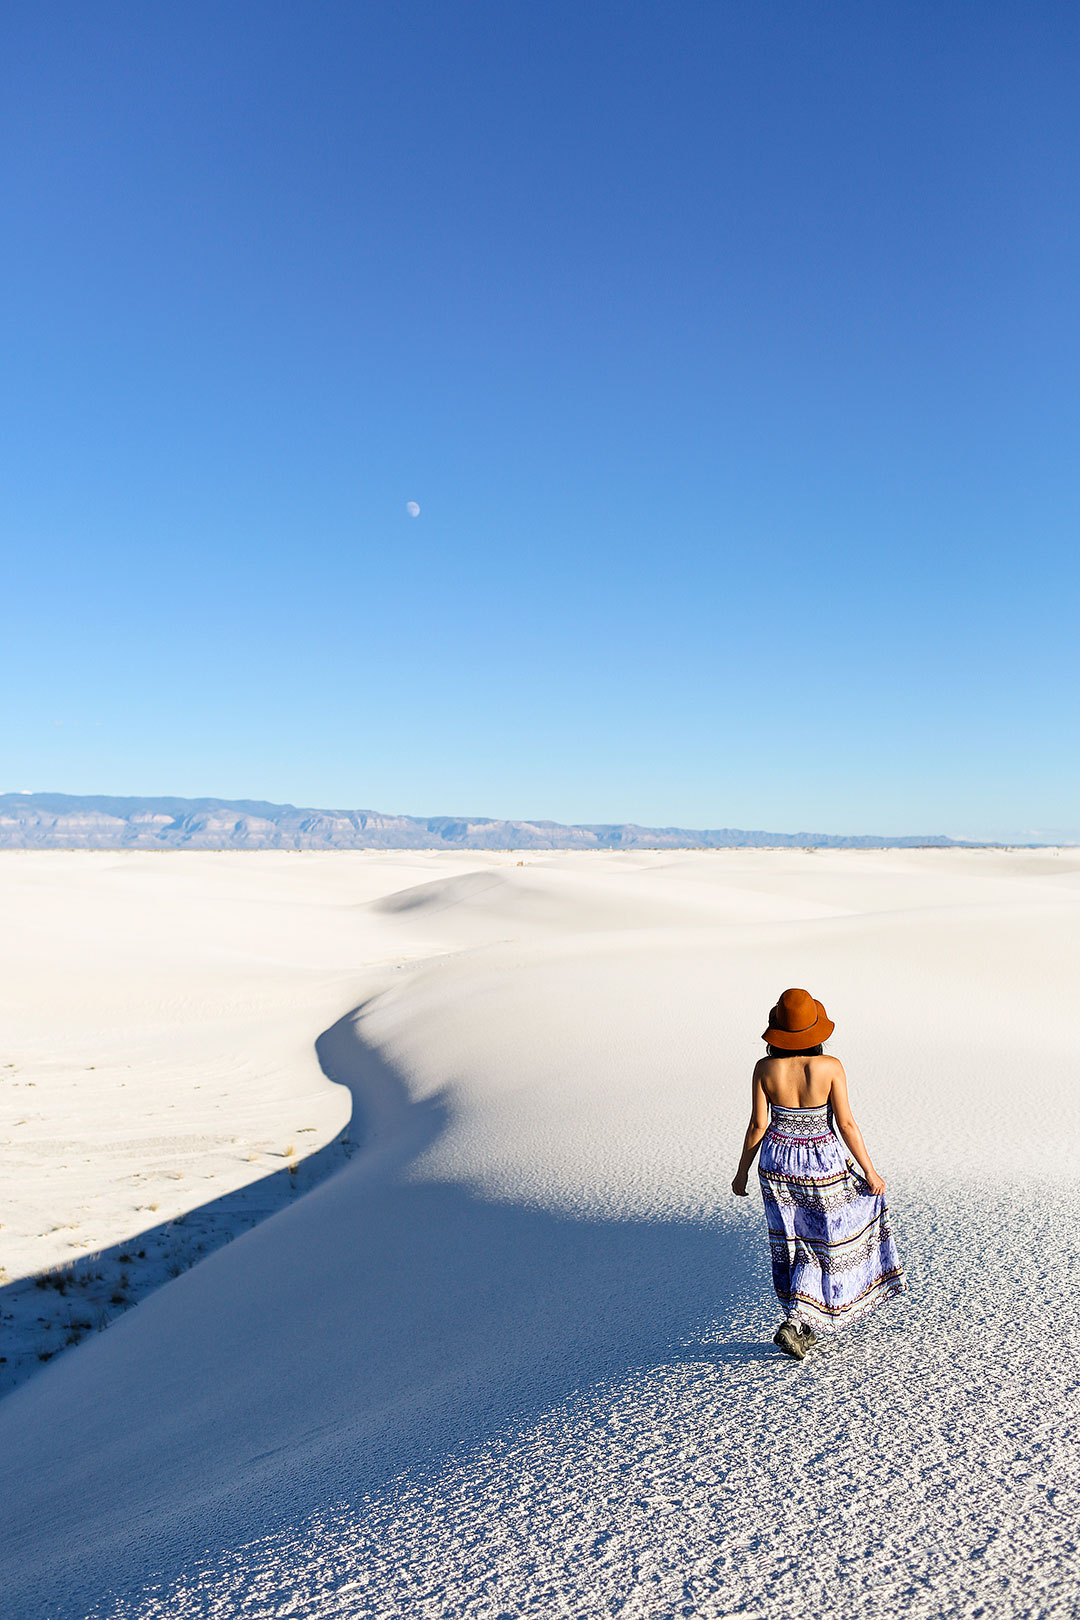 Popular White Sands in New Mexico TeamJiX